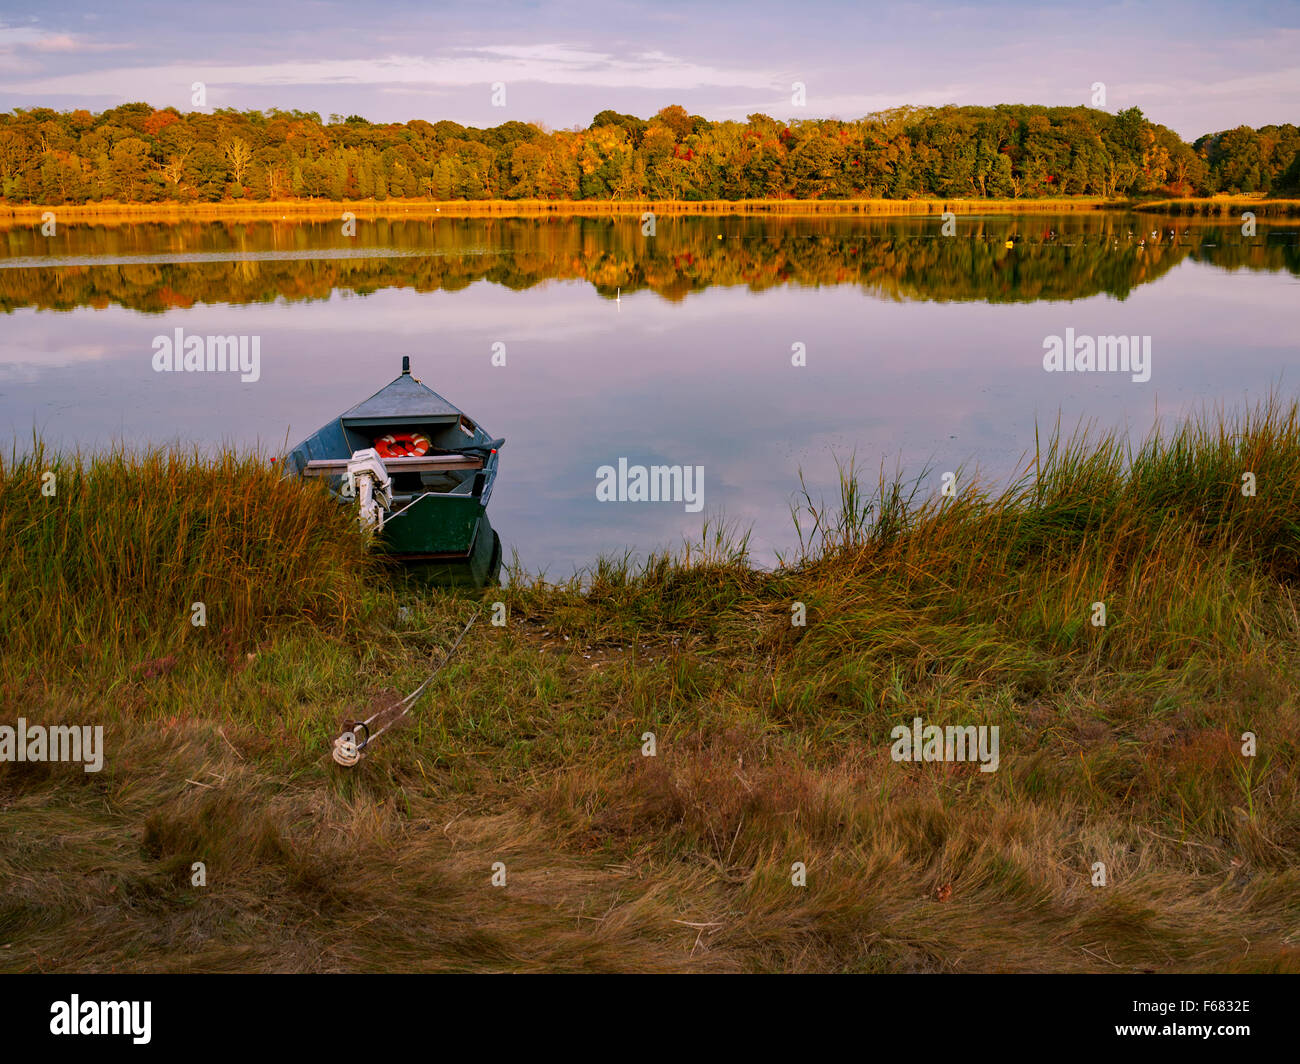 Salt Pond, Eastham, Cape Cod, Massachusetts, USA with a solitary boat moored in the water. Stock Photo